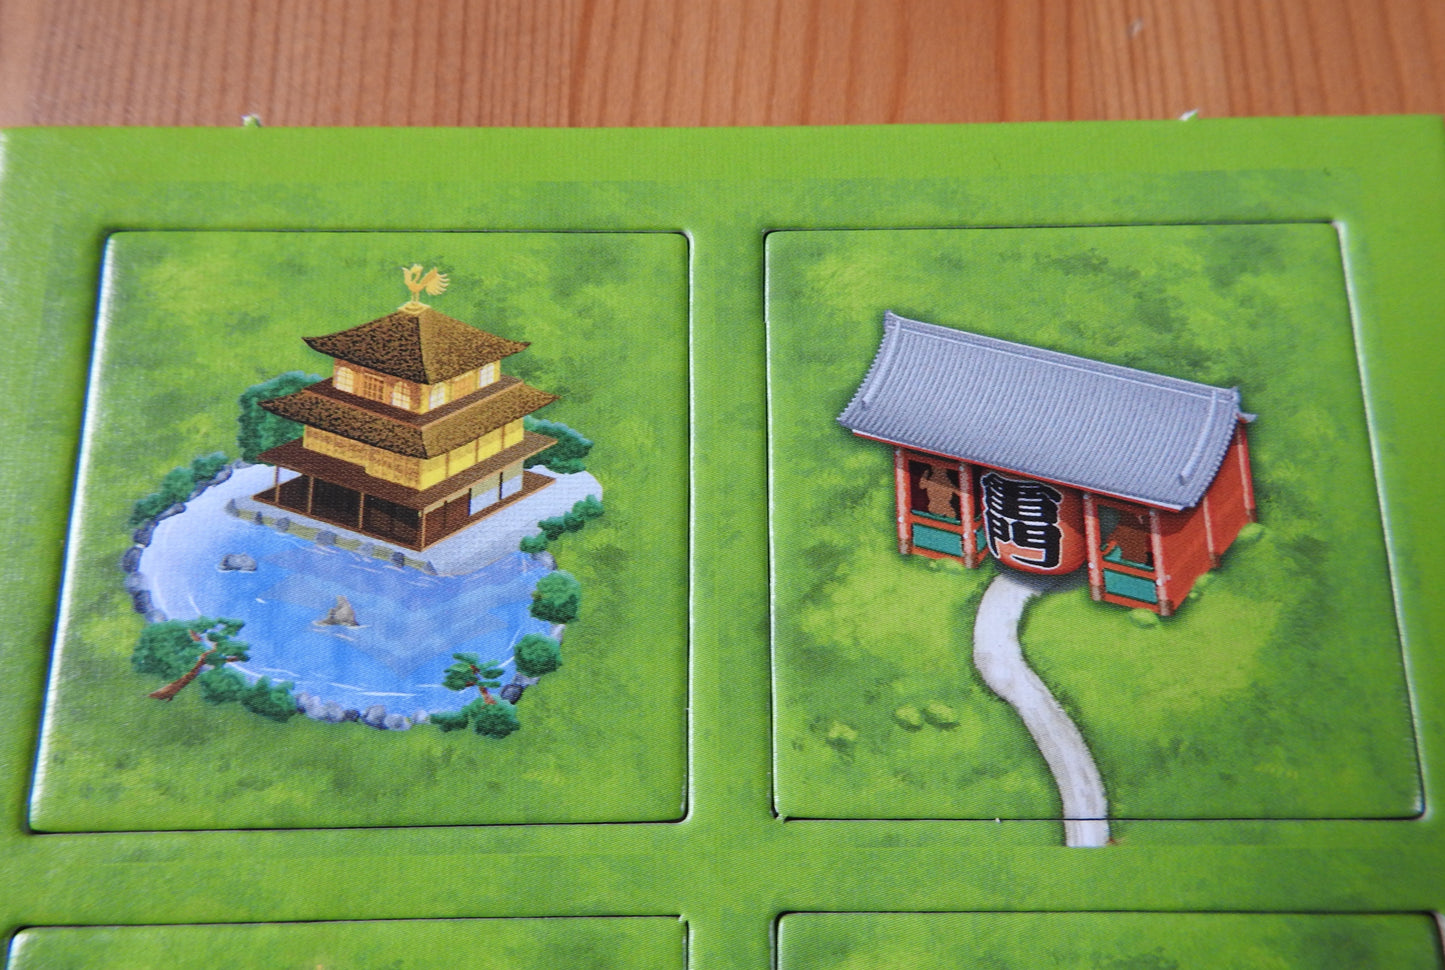 Closer view of some of the beautiful Japanese Buildings featured, including a golden temple and a shrine gate.